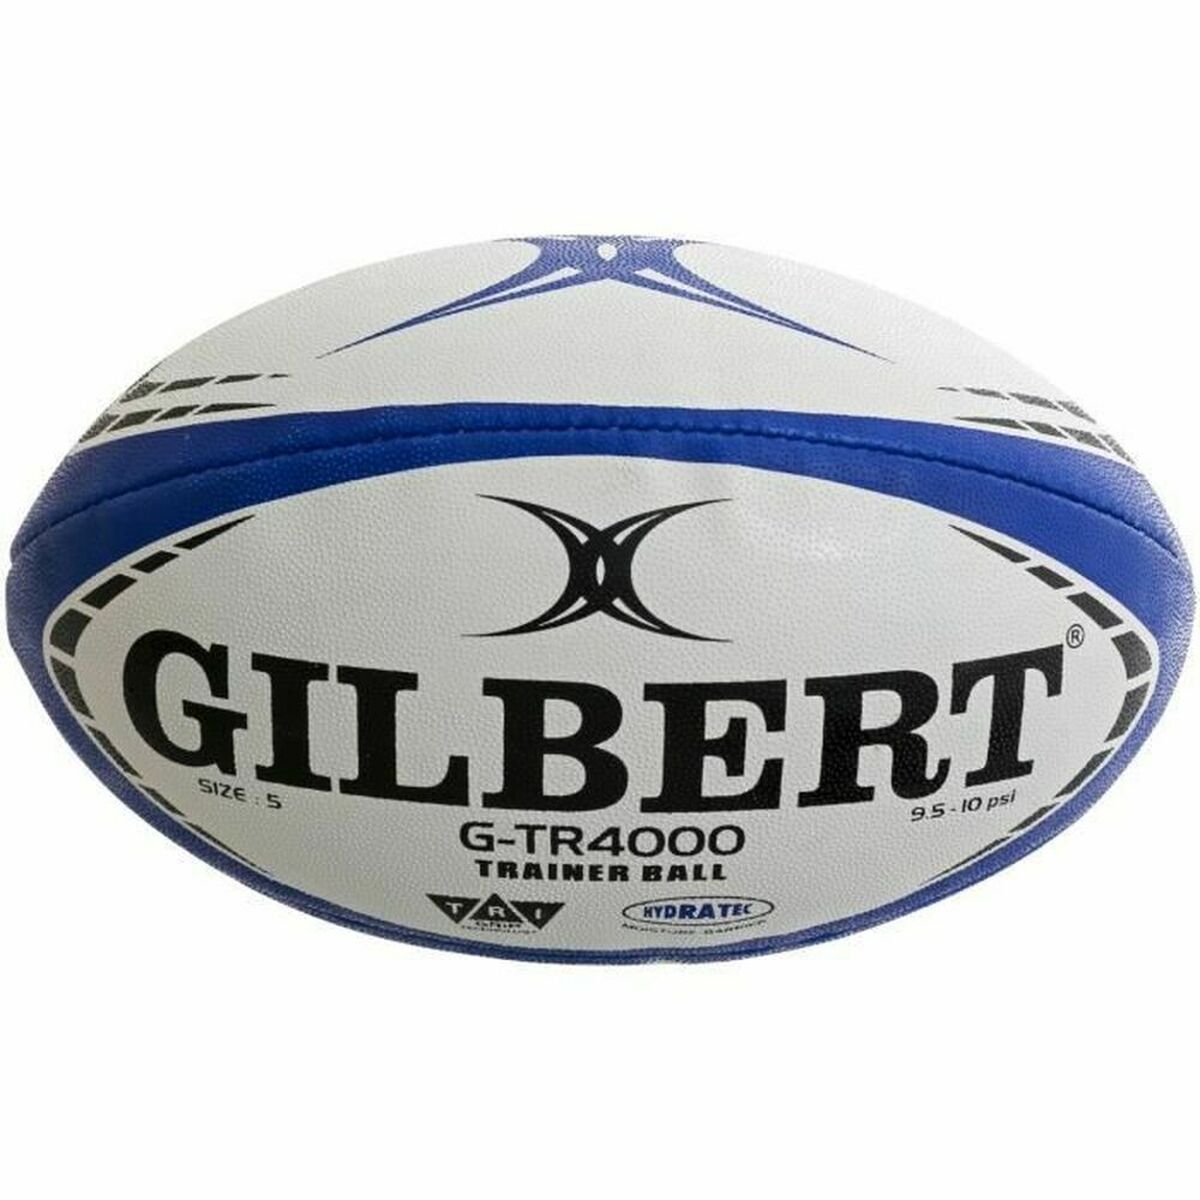 Rugby Ball Gilbert G-TR4000 TRAINER Multicolour 3 Blue Navy Blue